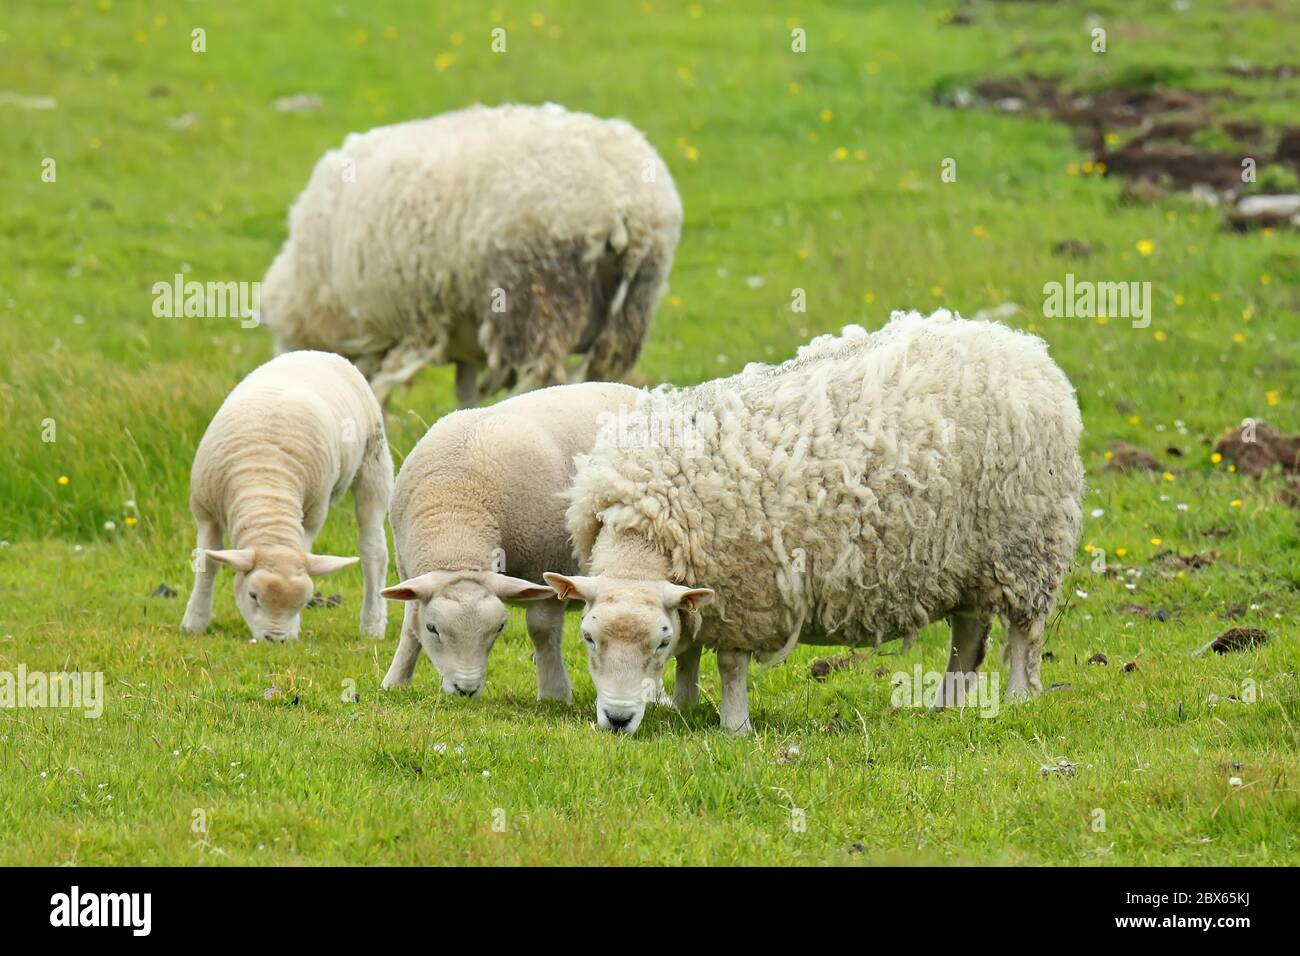 Family of Sheep grazing and standing in a row on green grass, Shetland Islands, Scotland. Stock Photo